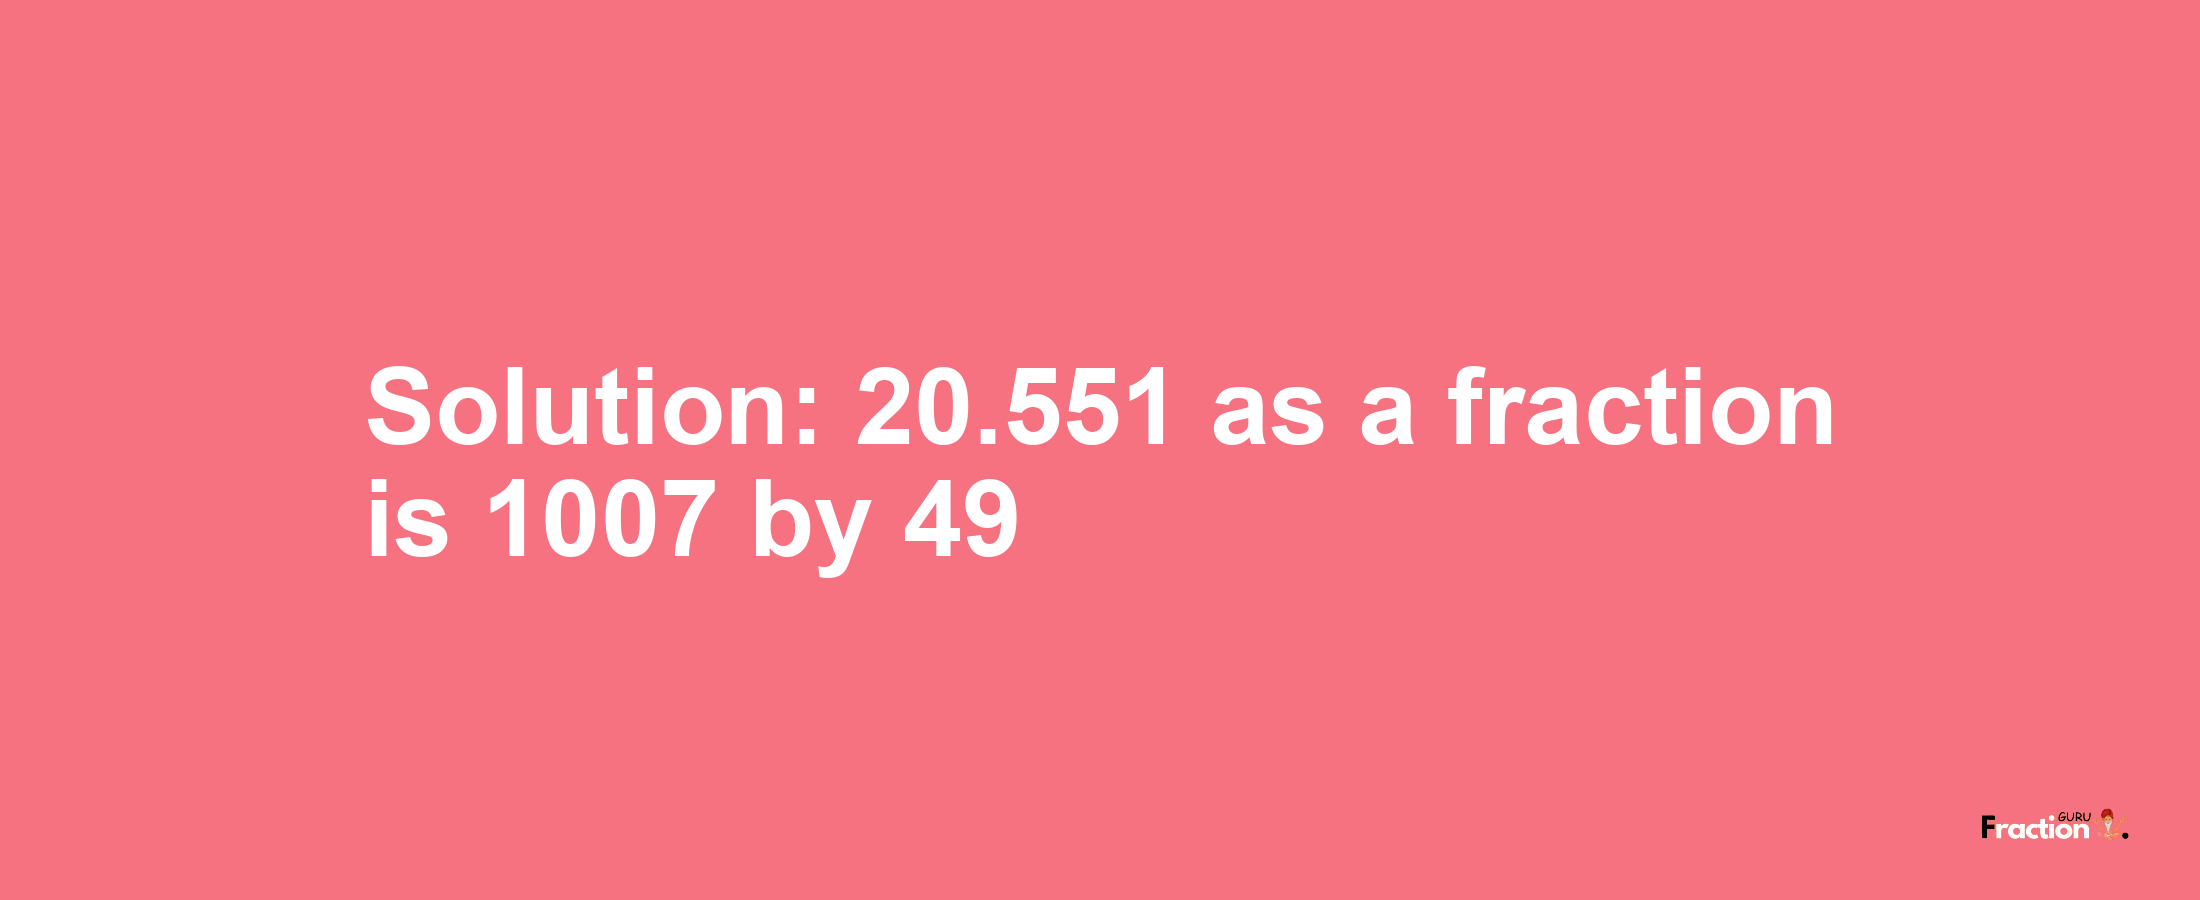 Solution:20.551 as a fraction is 1007/49